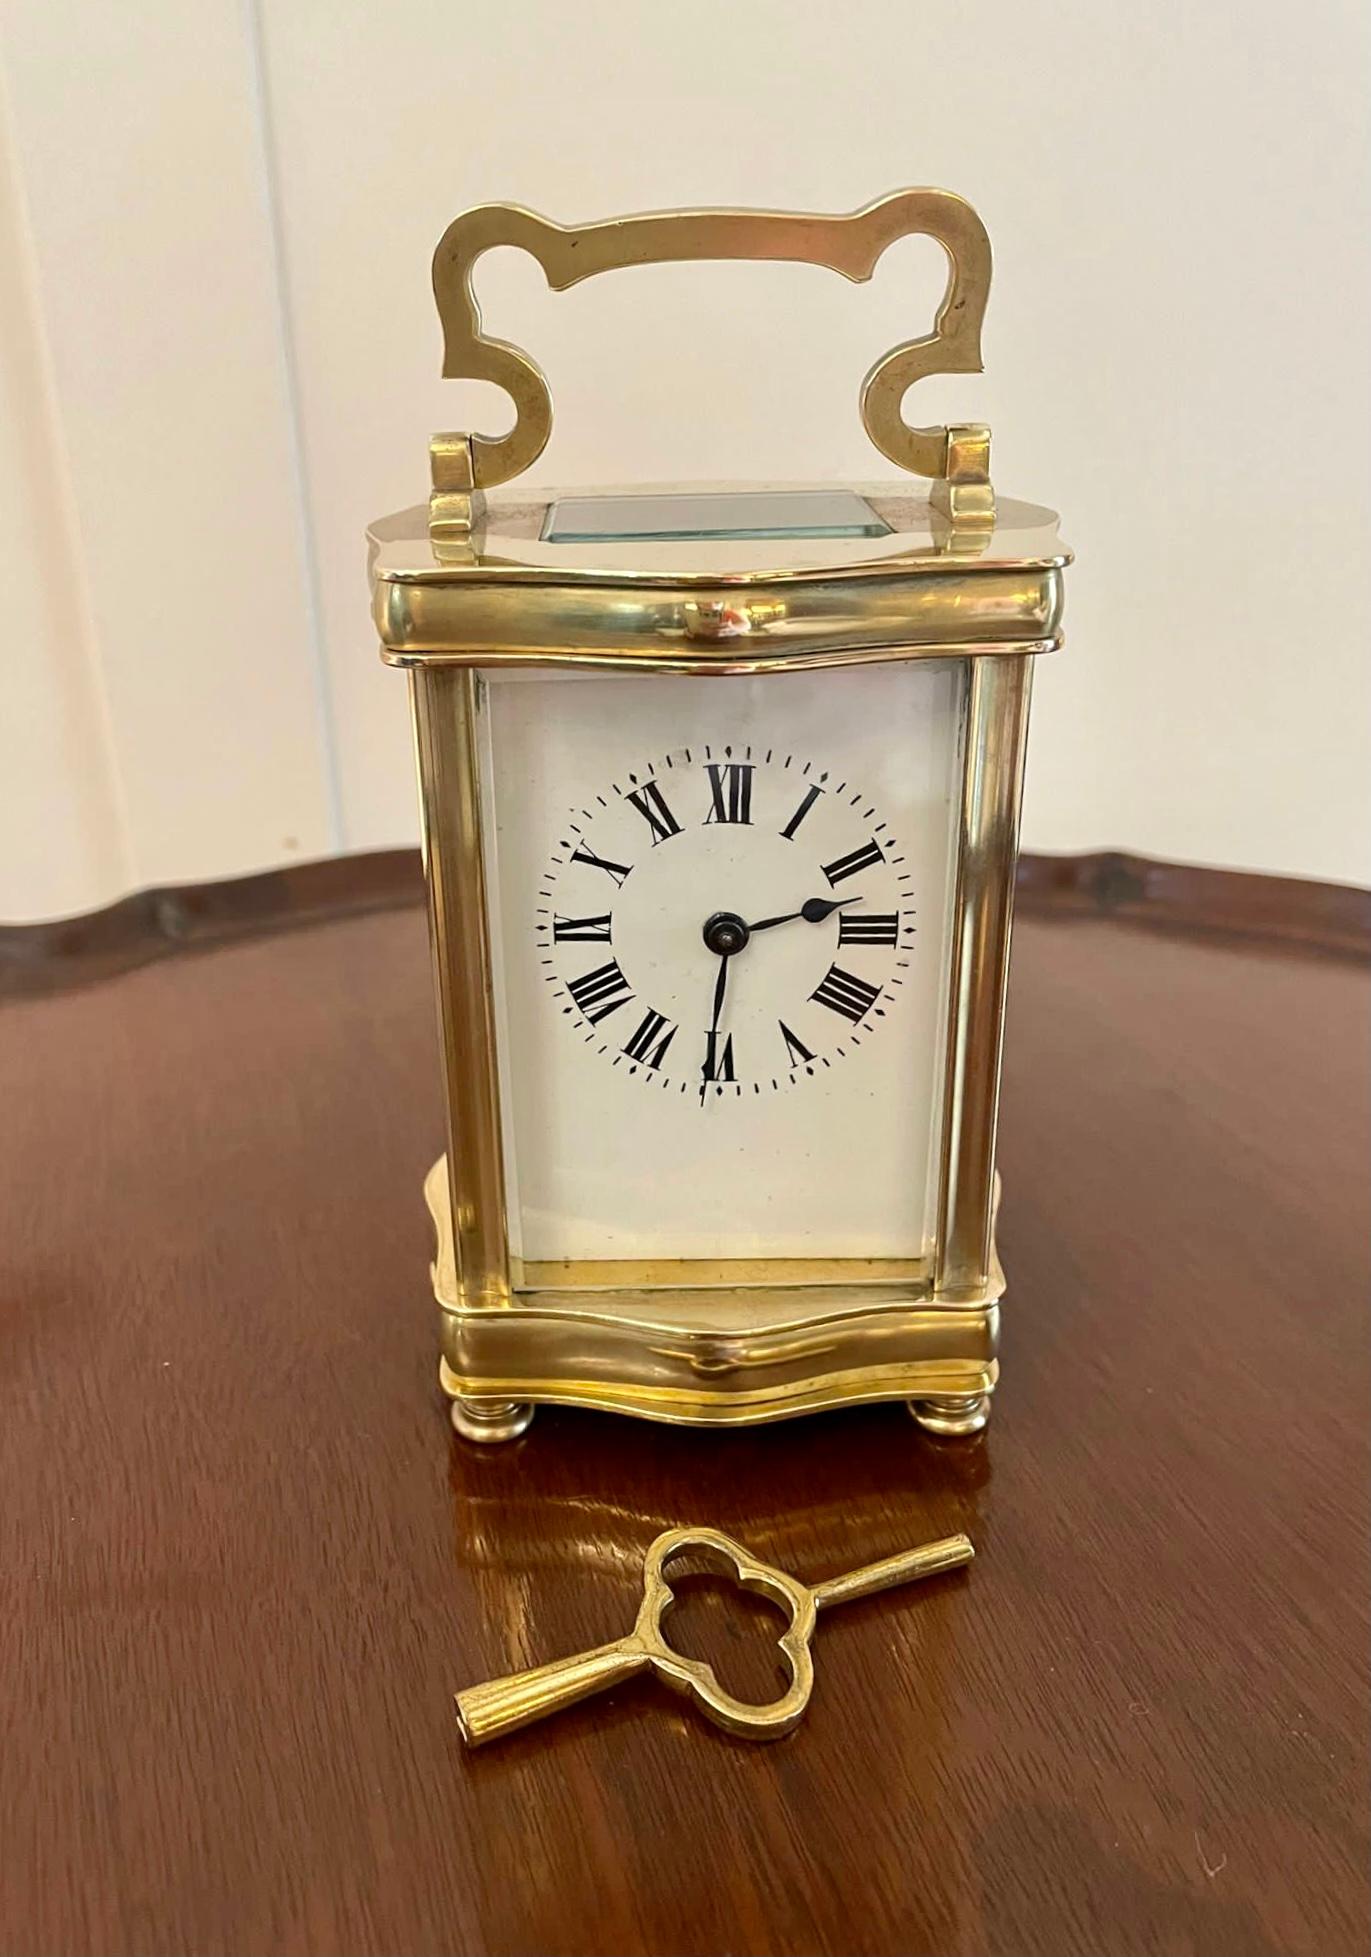 Antique French quality brass carriage clock having a quality brass serpentine shaped case with bevelled glass panels and door, shaped carrying handle to the top, enamel dial with original hands and Roman numerals, eight day movement and original